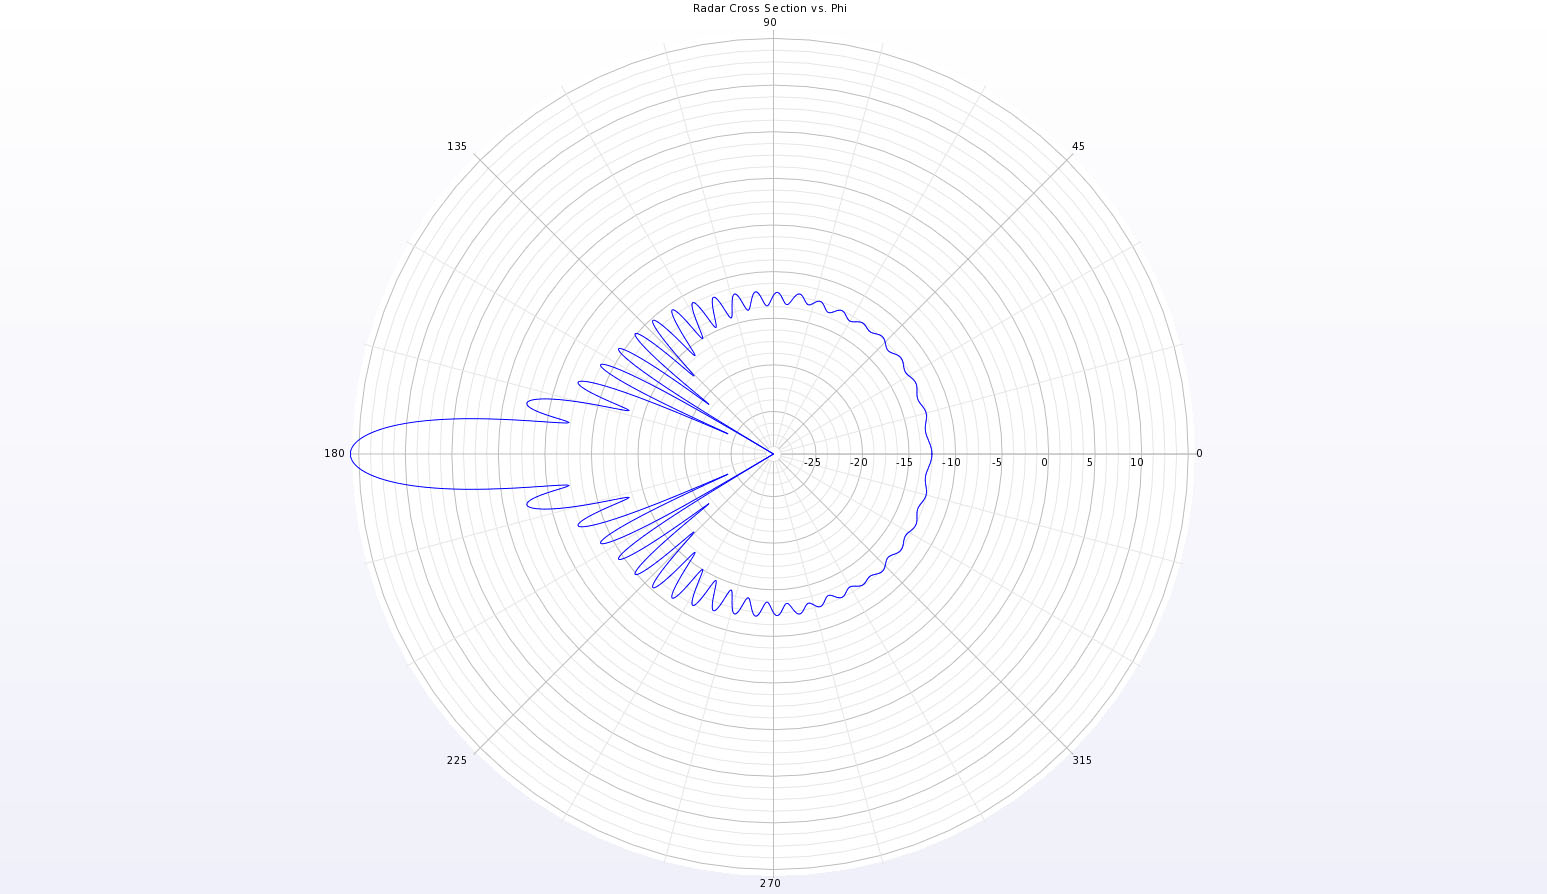 Figure 4A full polar plot in the XY plane of the bistatic scattering pattern for the sphere.